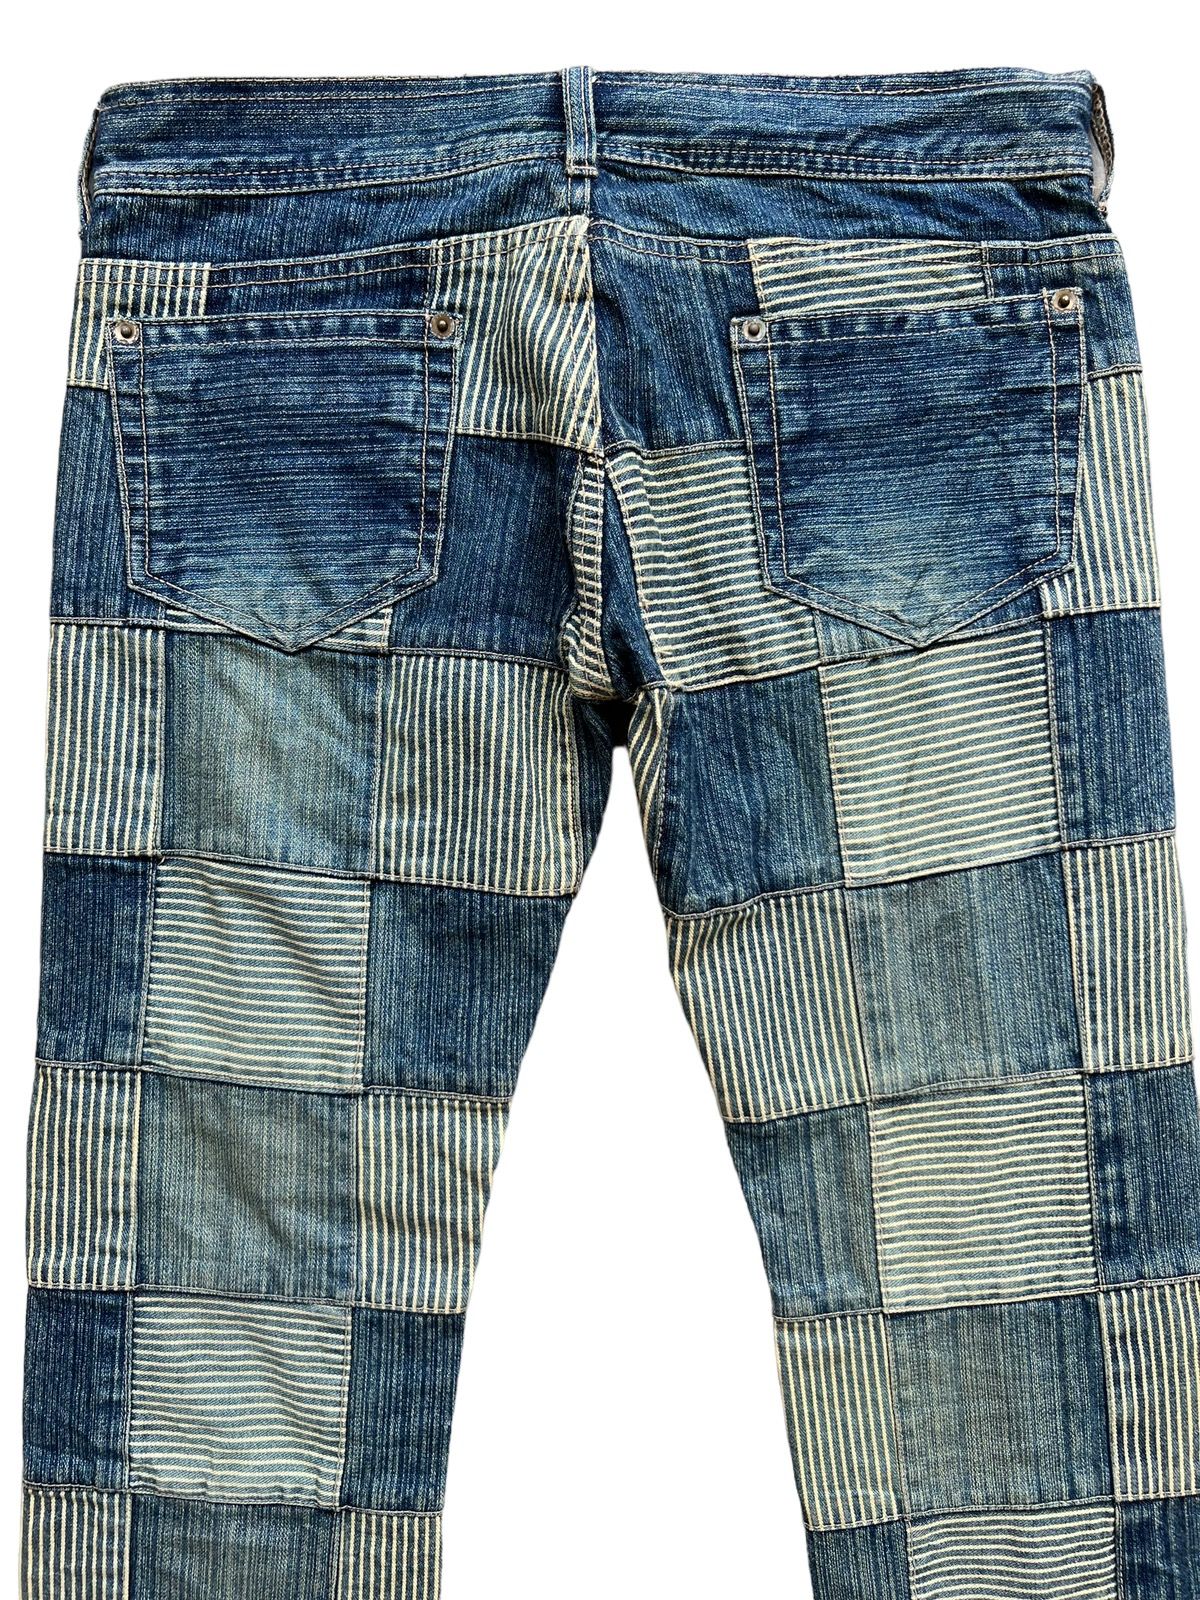 Japanese Brand Inspired by Kapital Patchwork Jeans 31x28.5 - 5